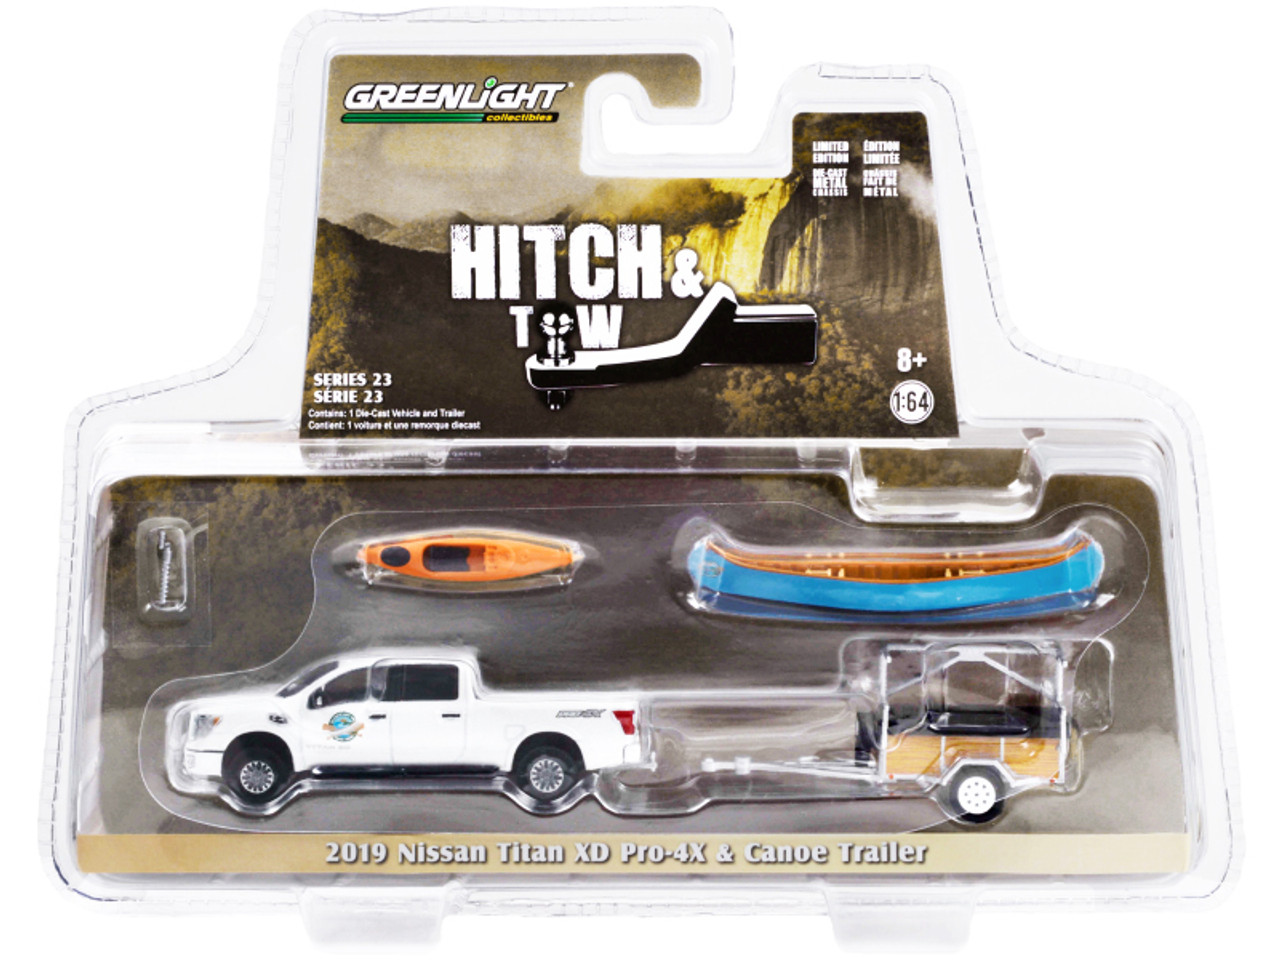 2019 Nissan Titan XD Pro-4X Pickup Truck White Metallic "Whitewater Canoe Rental" and Canoe Trailer with Canoe Rack with Canoe and Kayak "Hitch & Tow" Series 23 1/64 Diecast Model Car by Greenlight